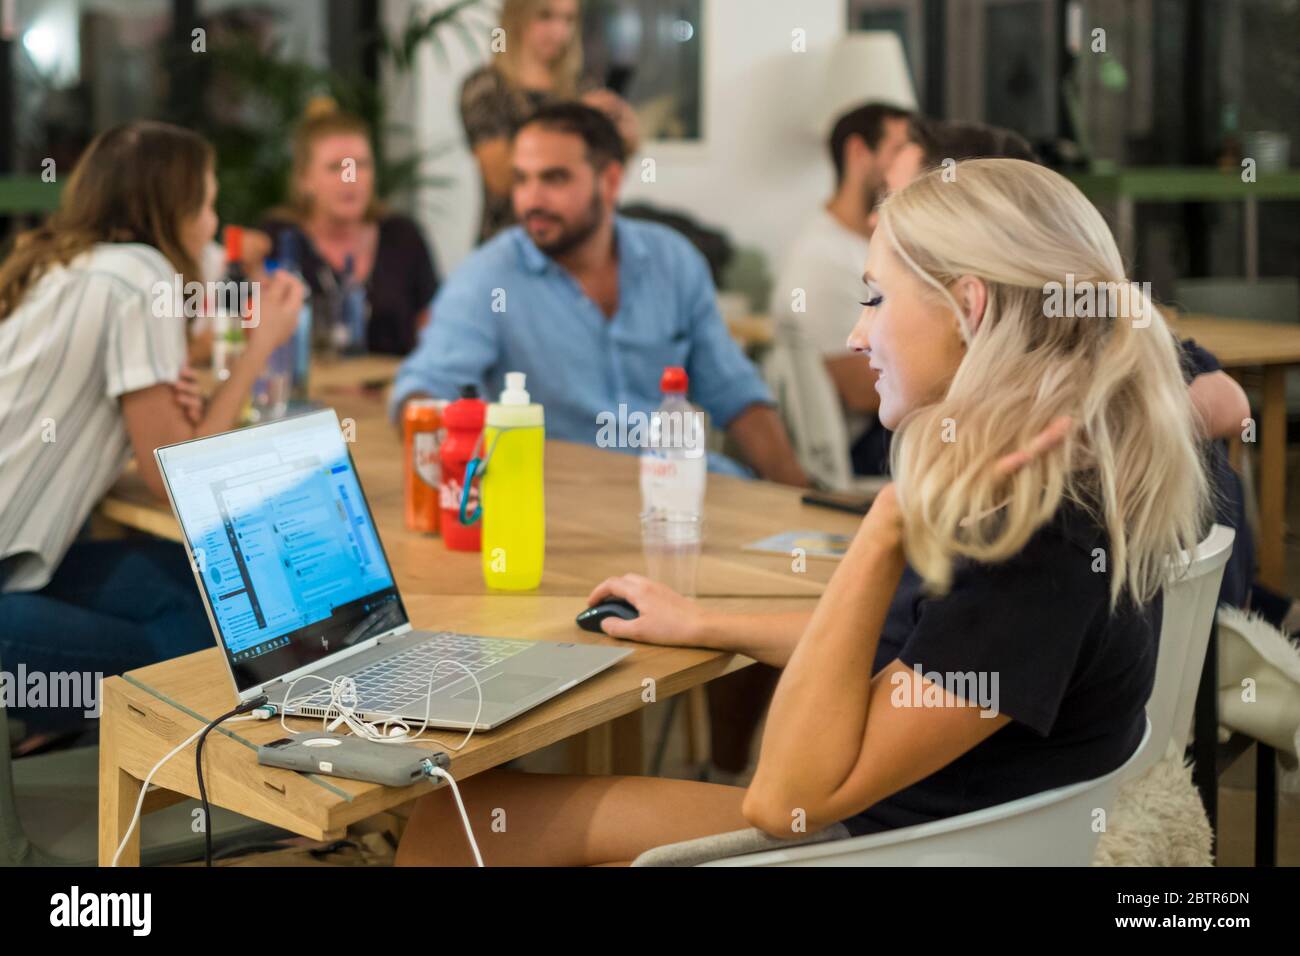 A woman works on a laptop while her co-workers meet and socialize in the background. Stock Photo